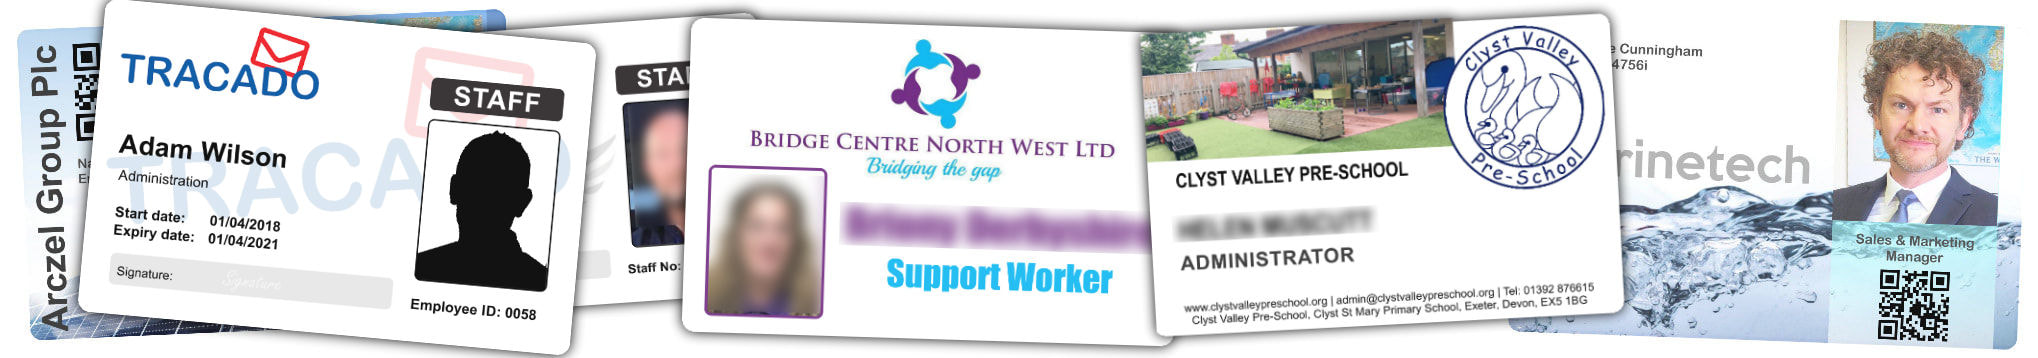 Watford examples of staff photo ID cards | samples of employee Identity card printing | Workers ID cards printed in 